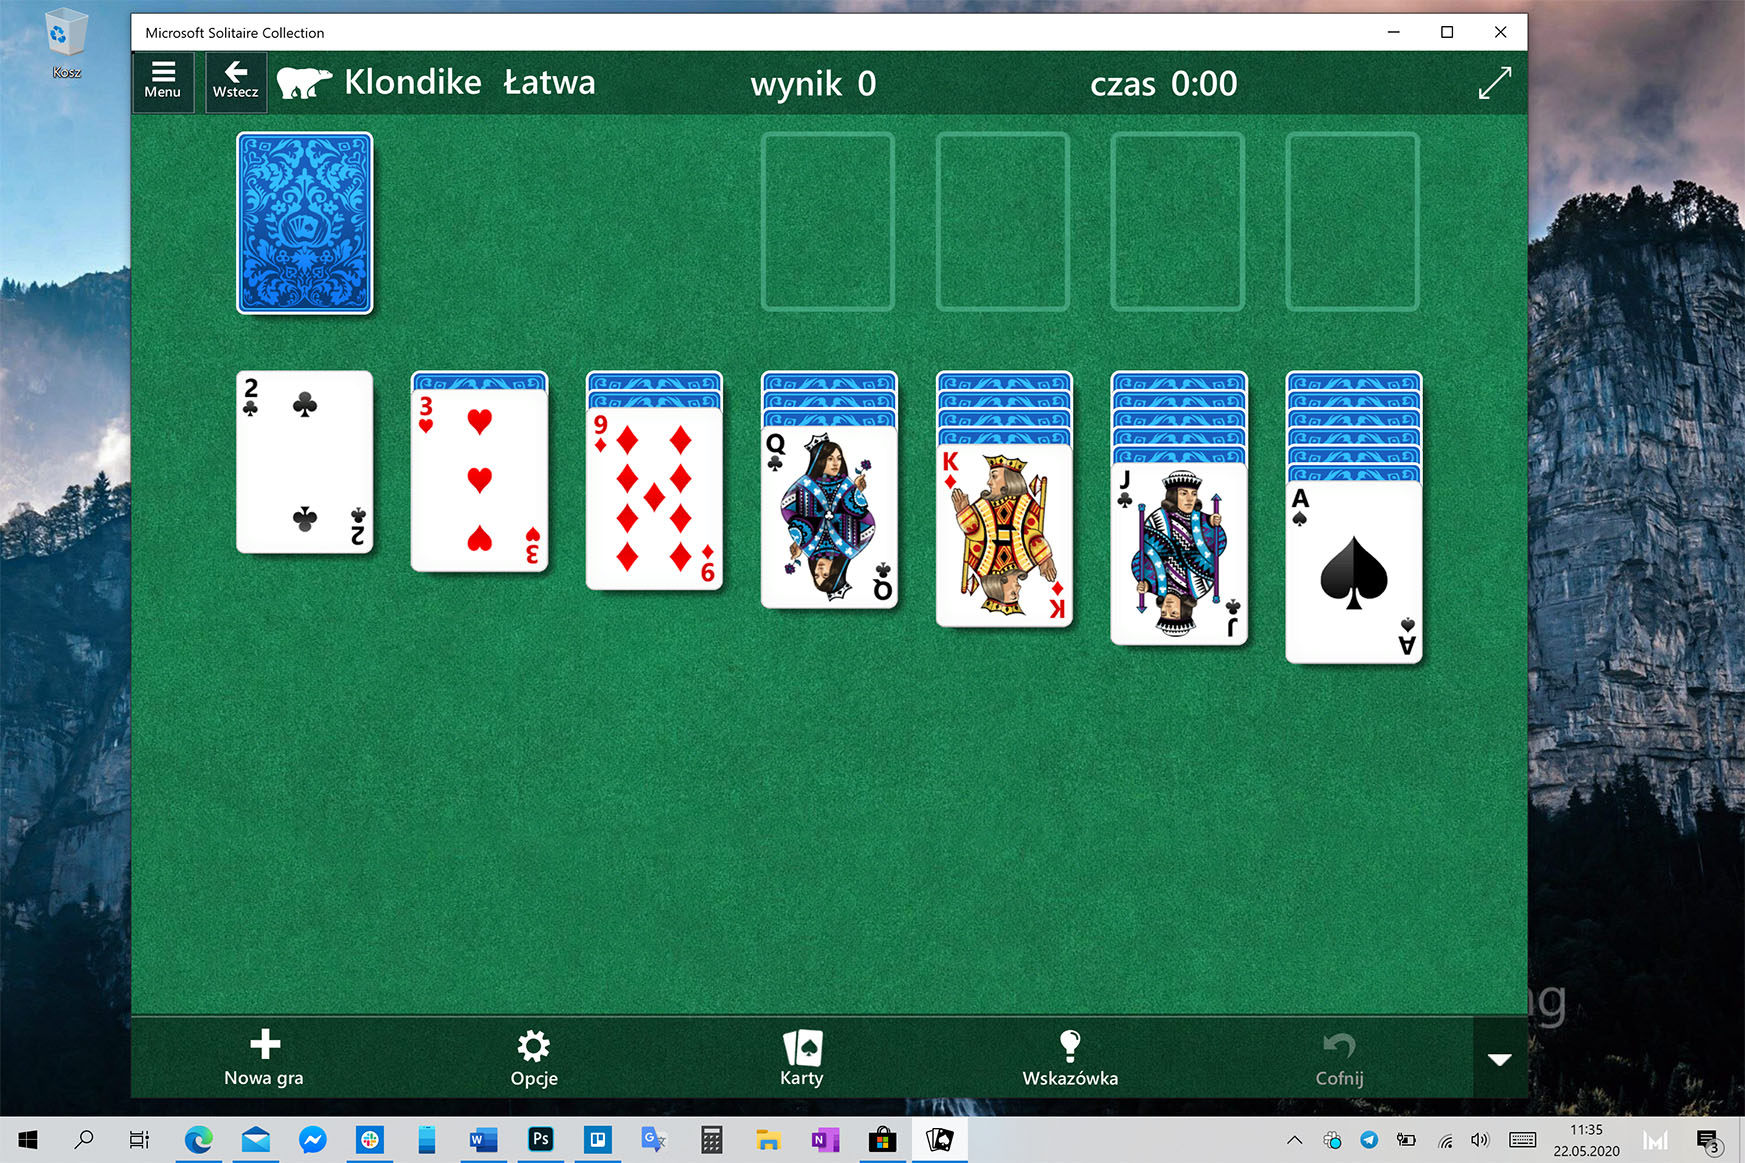 how do you reset statistis in microsoft solitaire collection